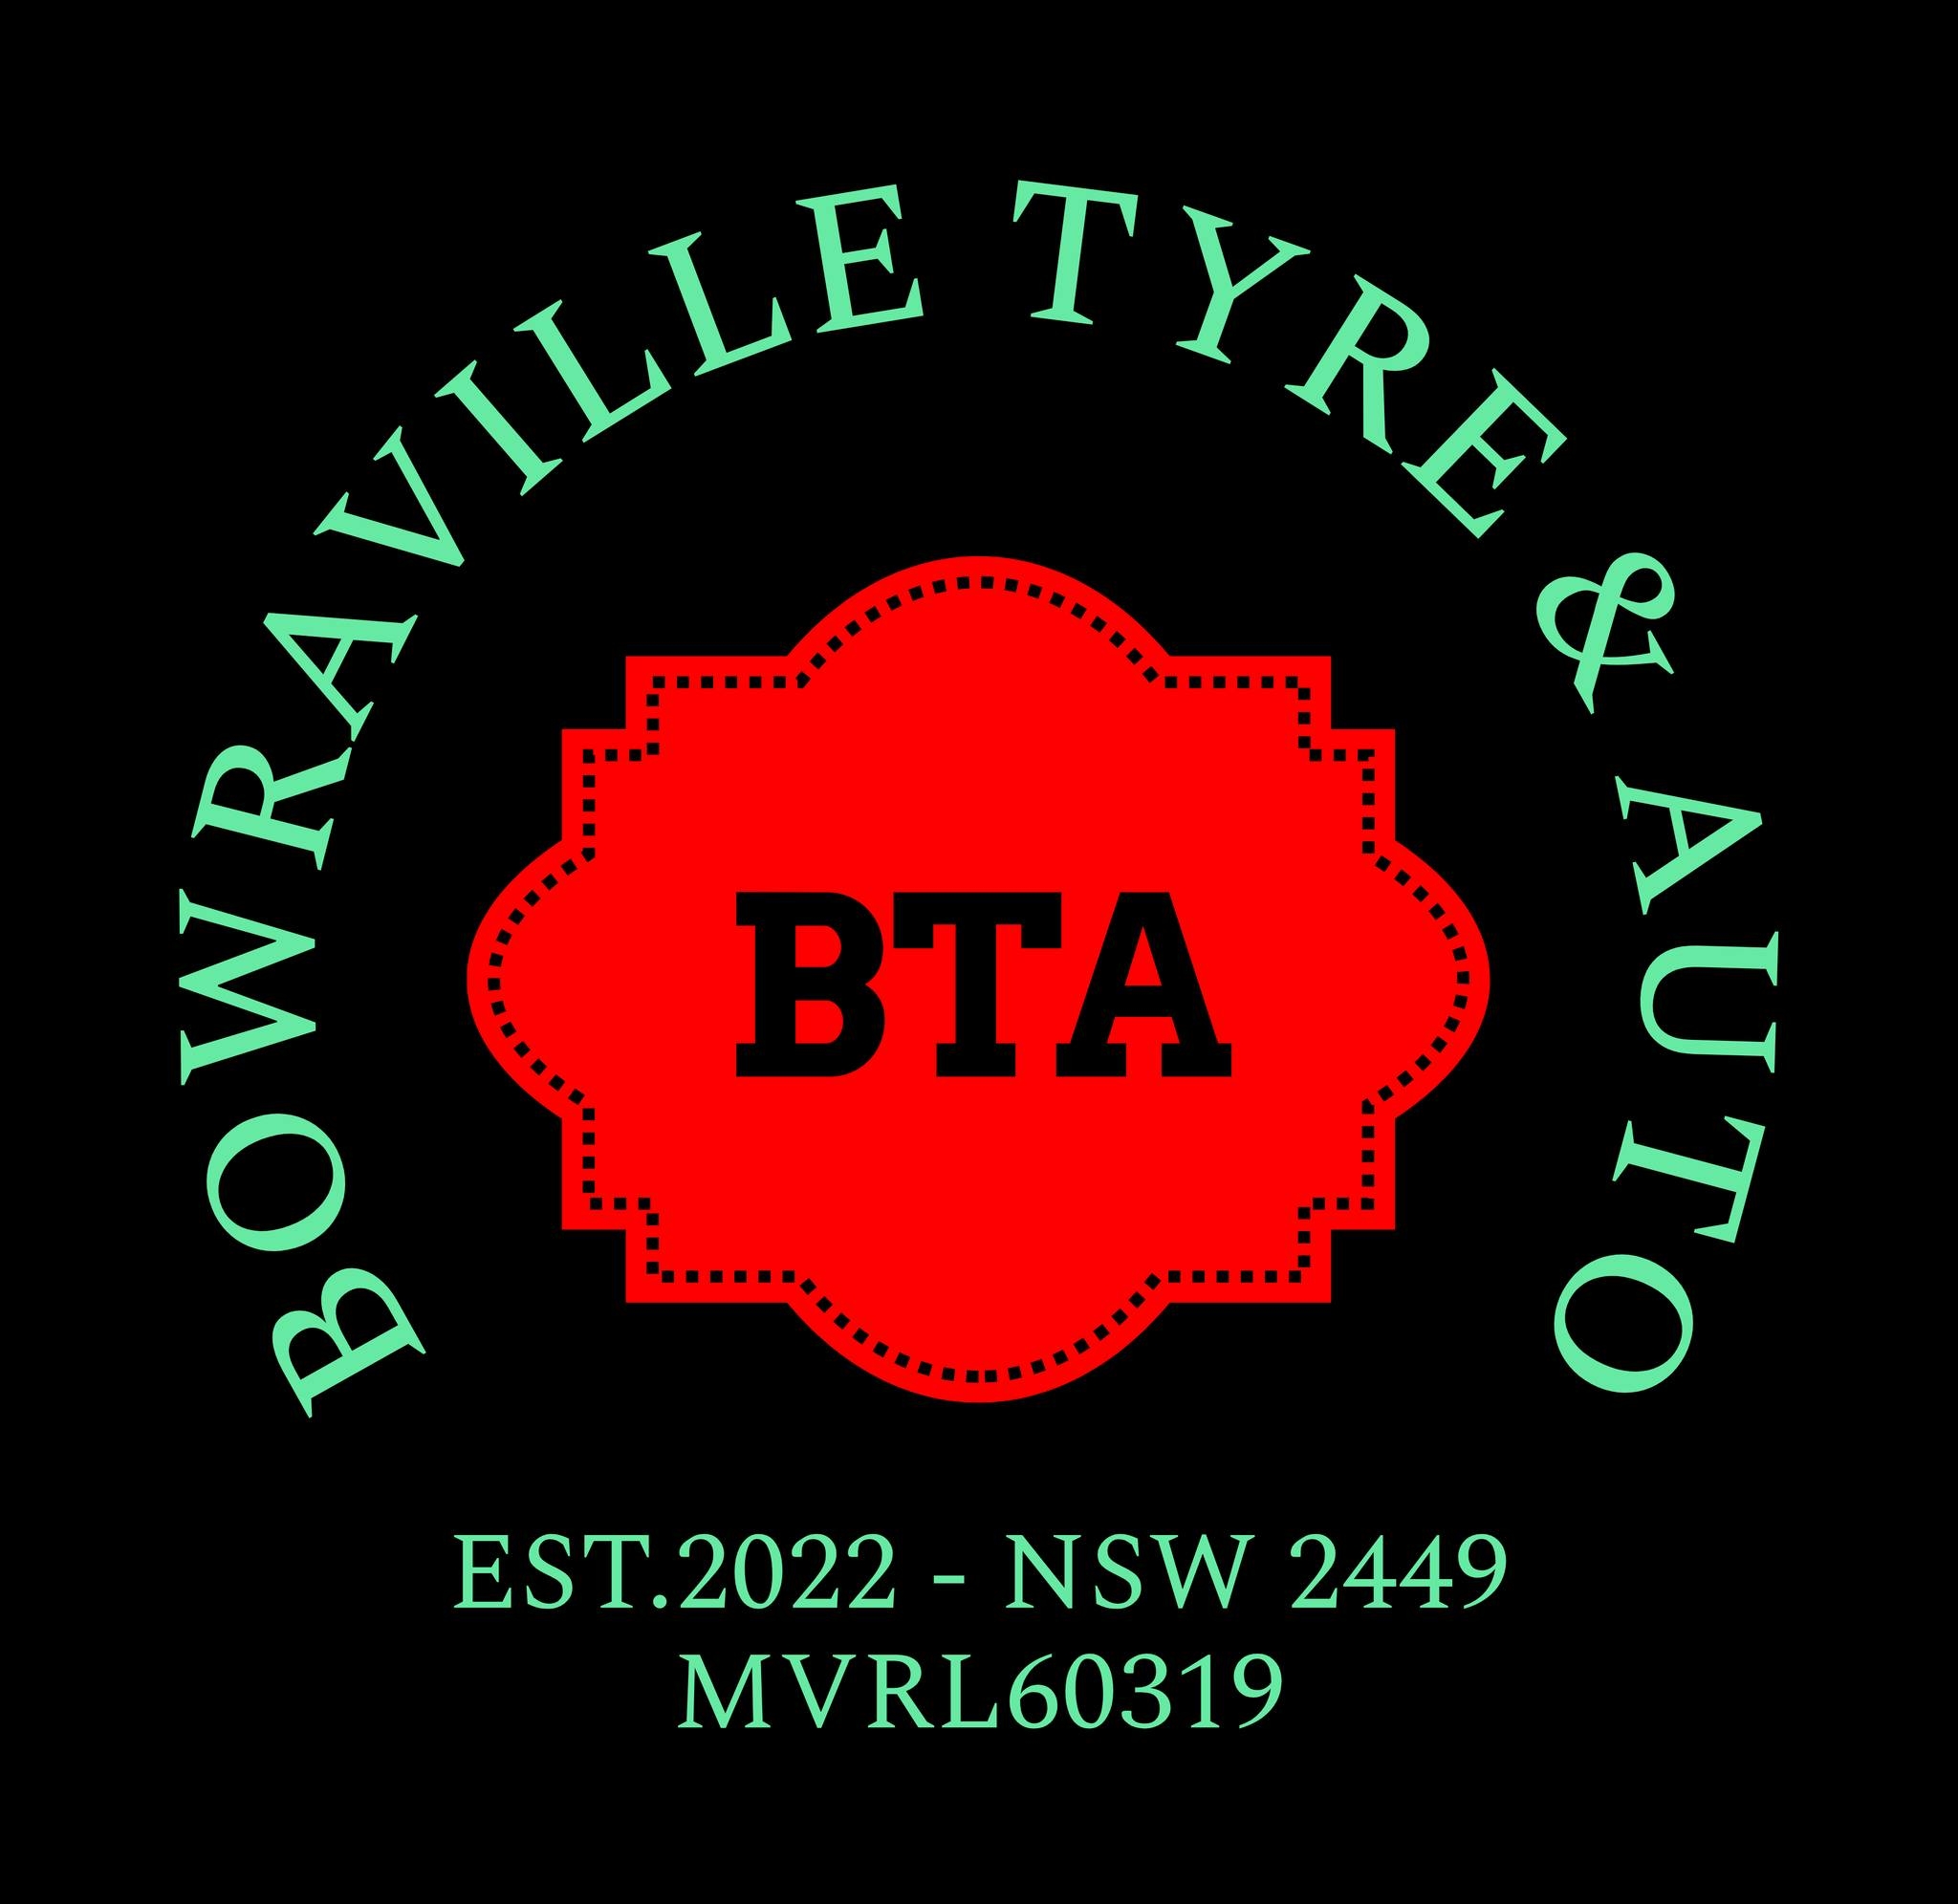 Bowraville Tyre and Auto